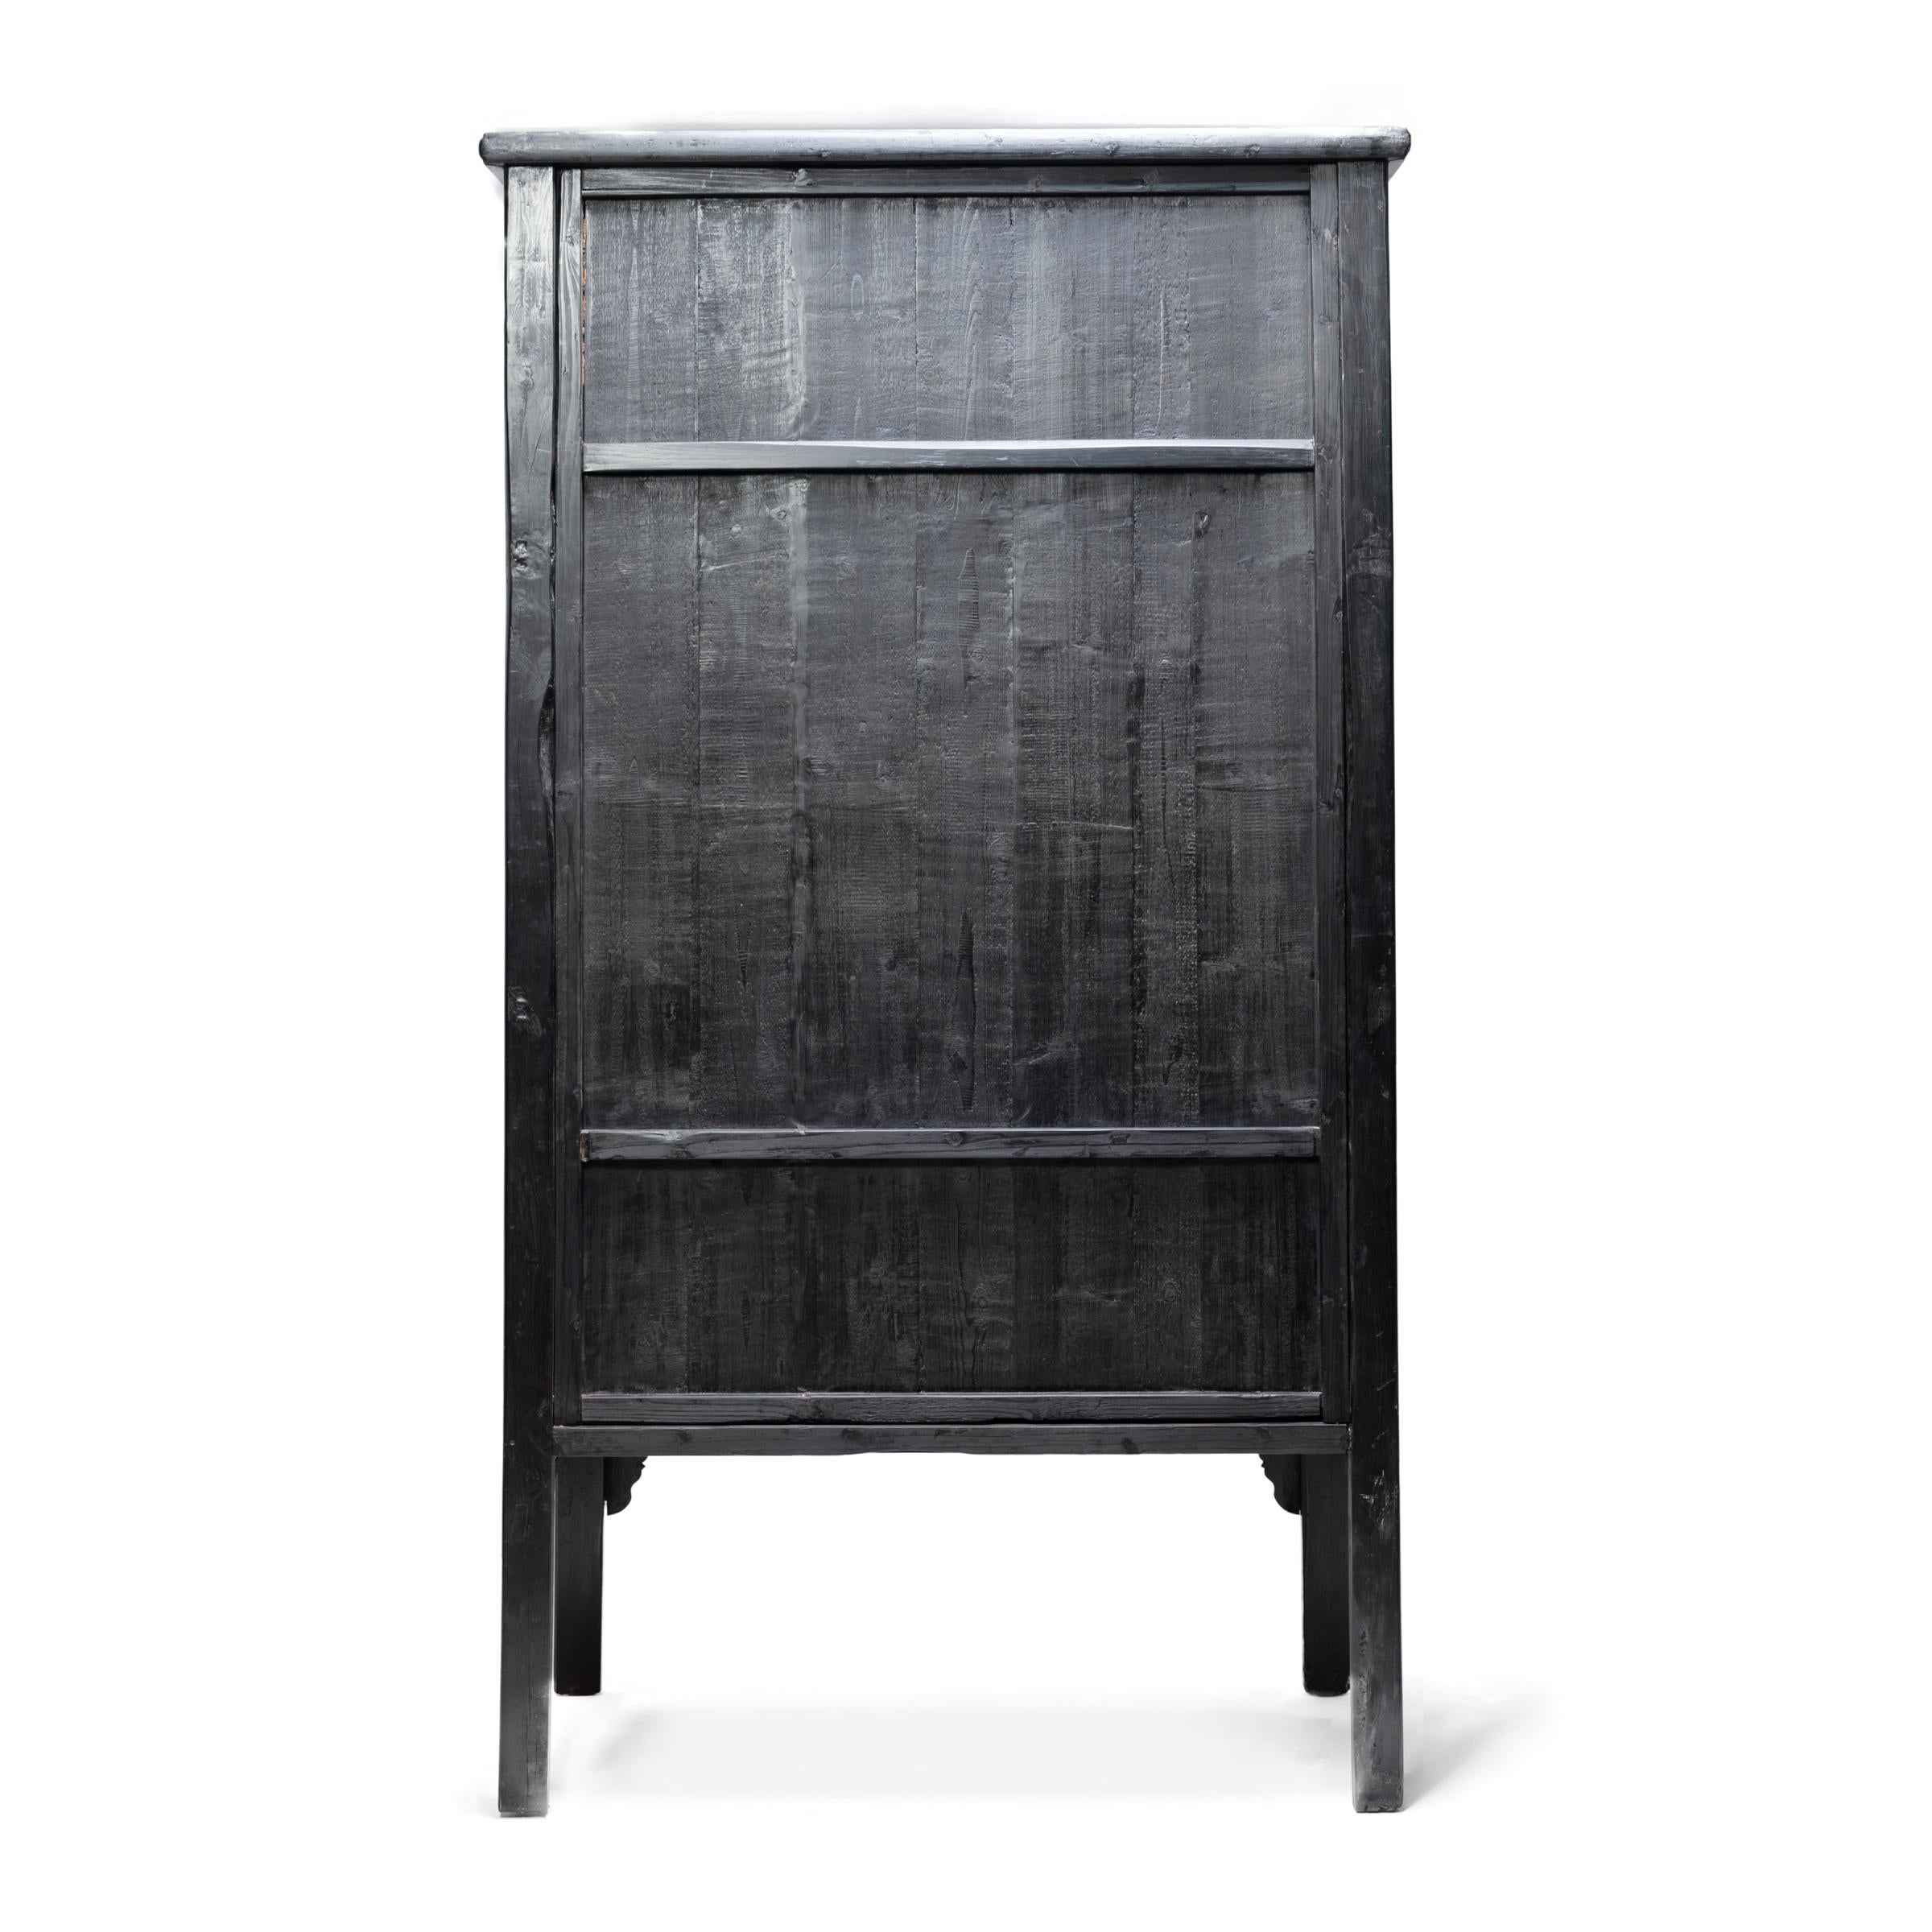 Lacquered Chinese Black Lacquer Scholar's Cabinet, c. 1850